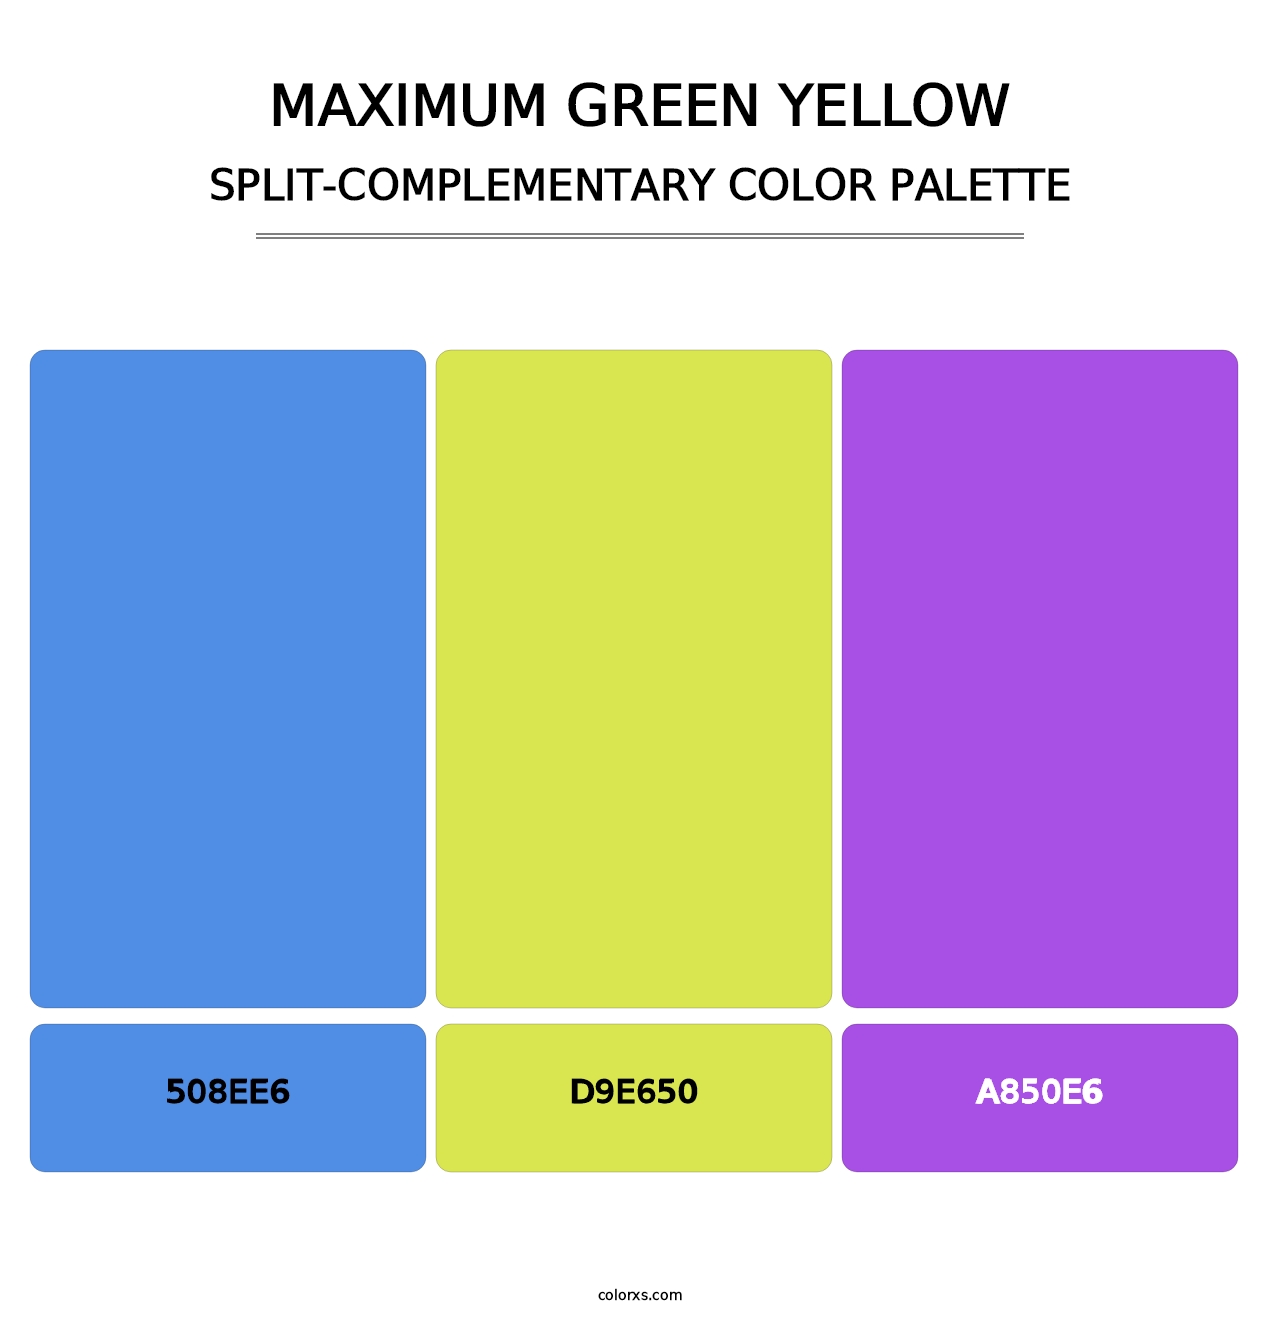 Maximum Green Yellow - Split-Complementary Color Palette